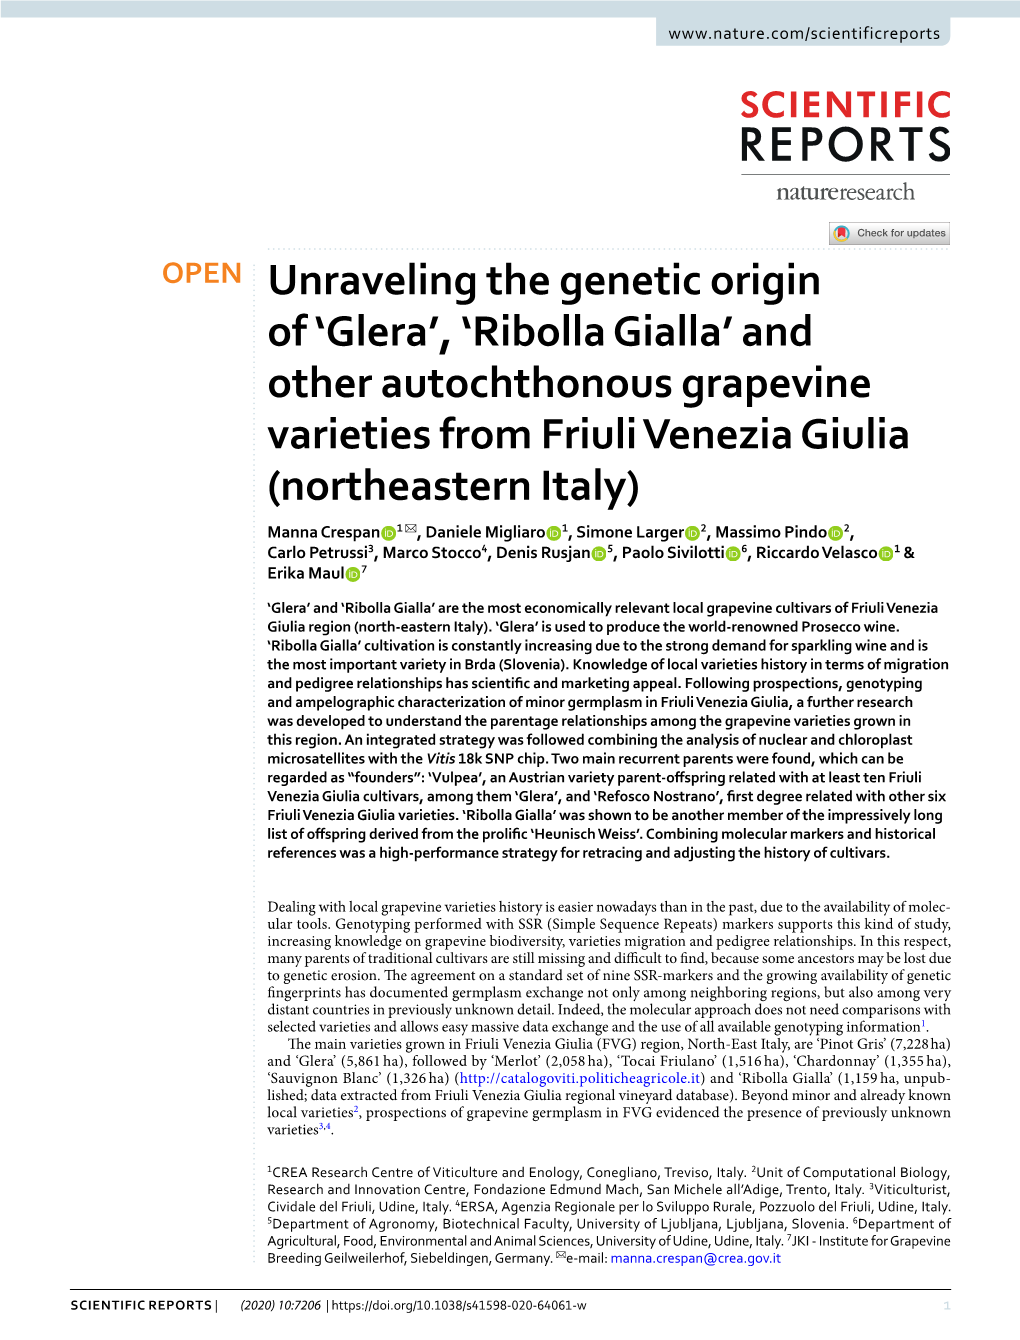 Unraveling the Genetic Origin of 'Glera', 'Ribolla Gialla' and Other